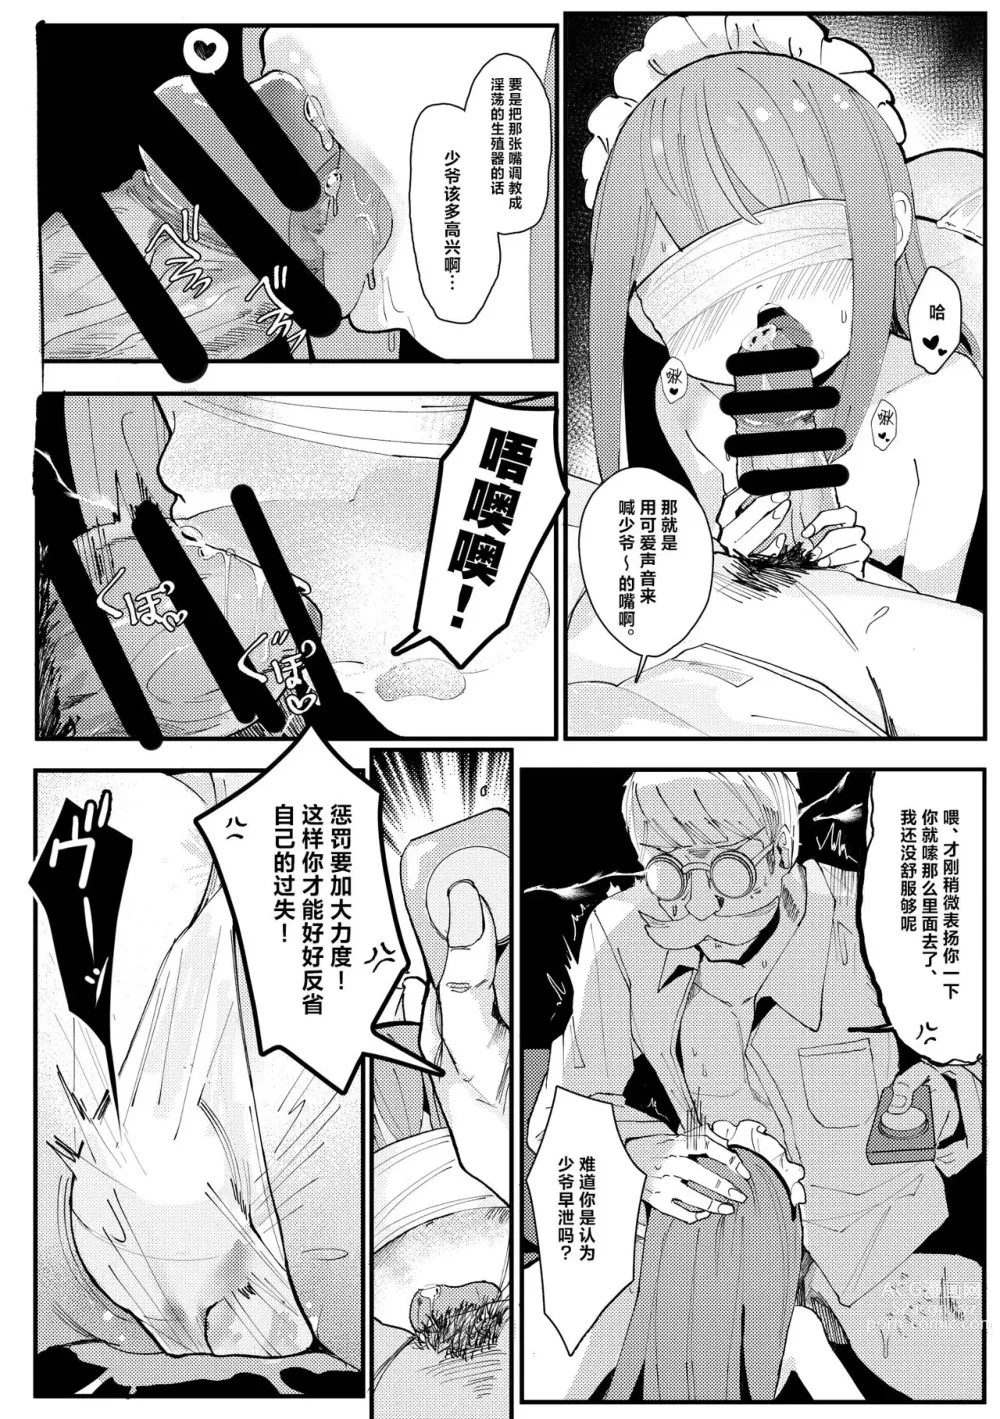 Page 7 of doujinshi 女仆性服务